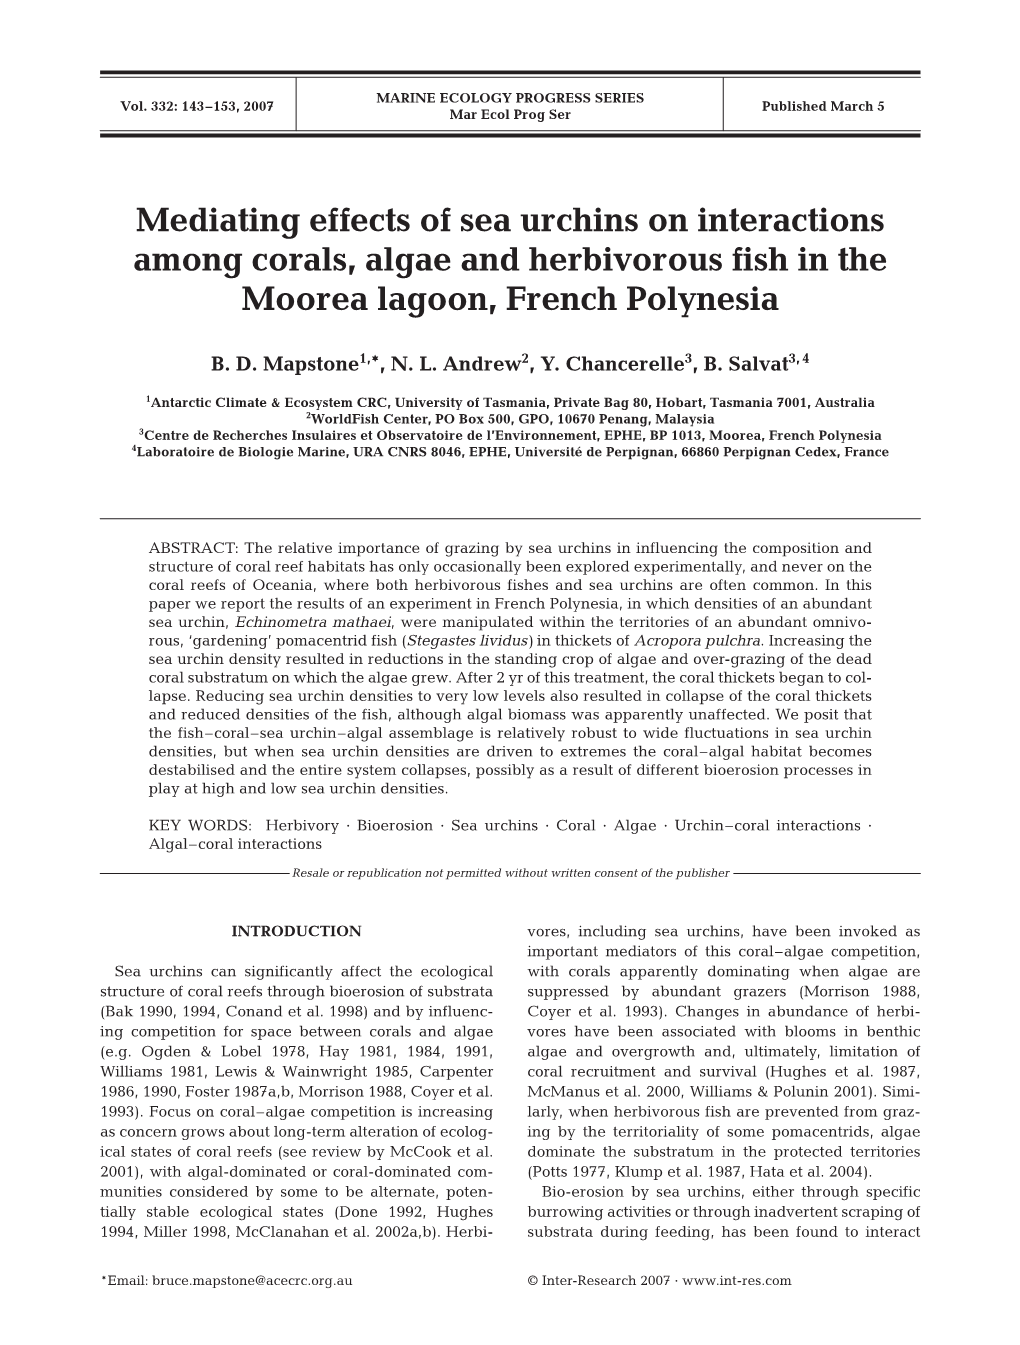 Mediating Effects of Sea Urchins on Interactions Among Corals, Algae and Herbivorous Fish in the Moorea Lagoon, French Polynesia